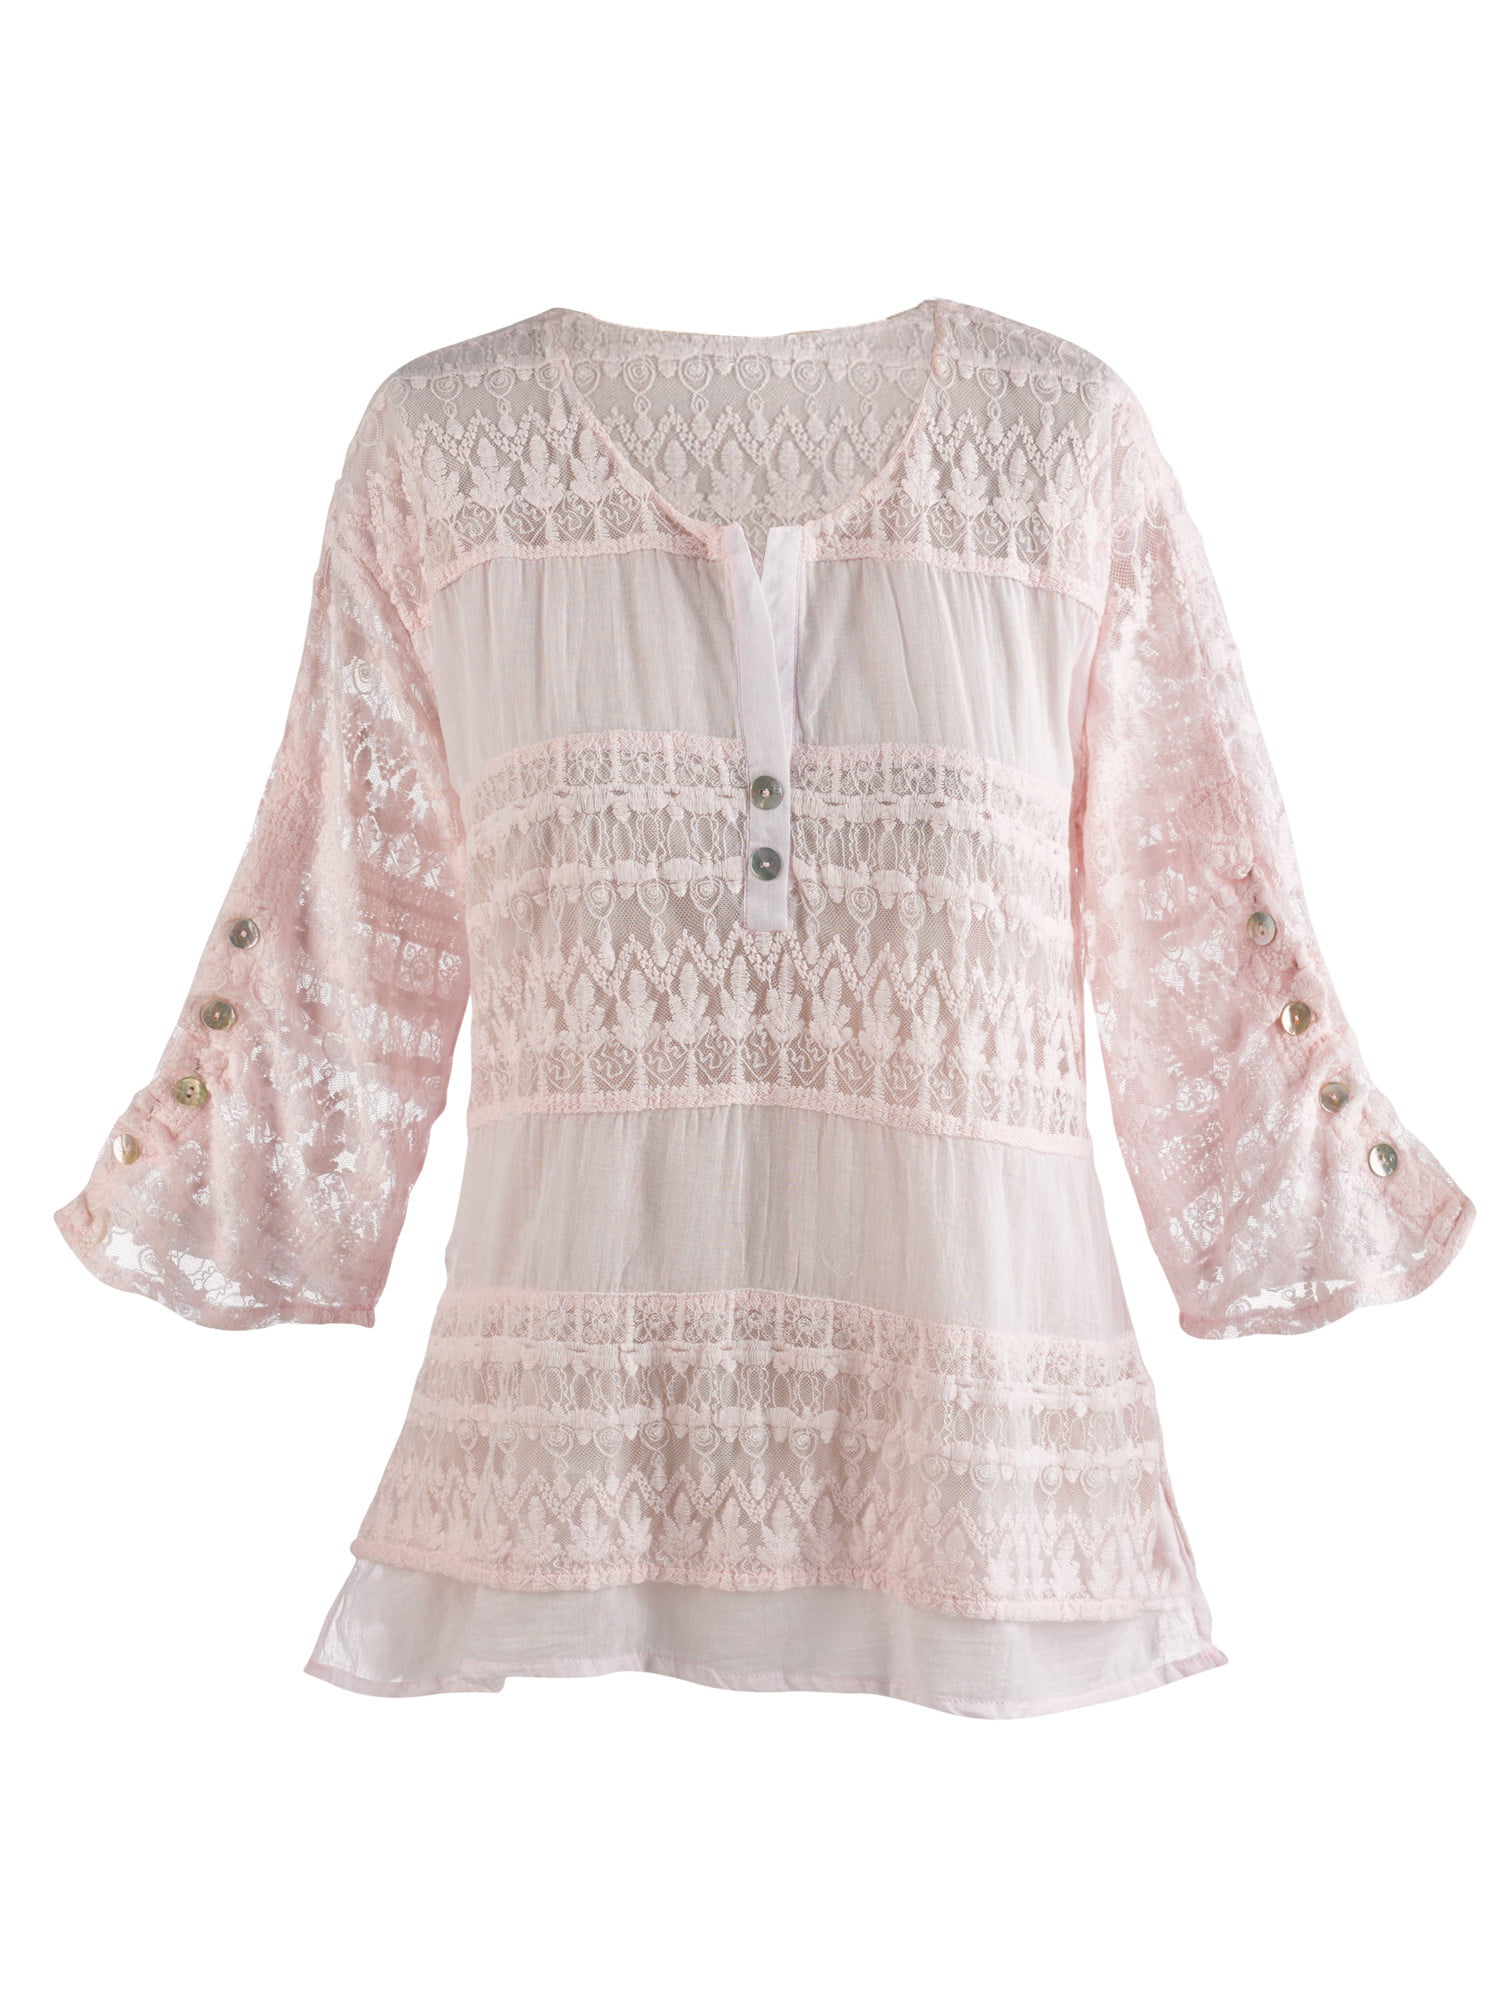 ASHWOOD - Ashwood/Cotton Connection Women's Tunic Top - Textured Lacey ...